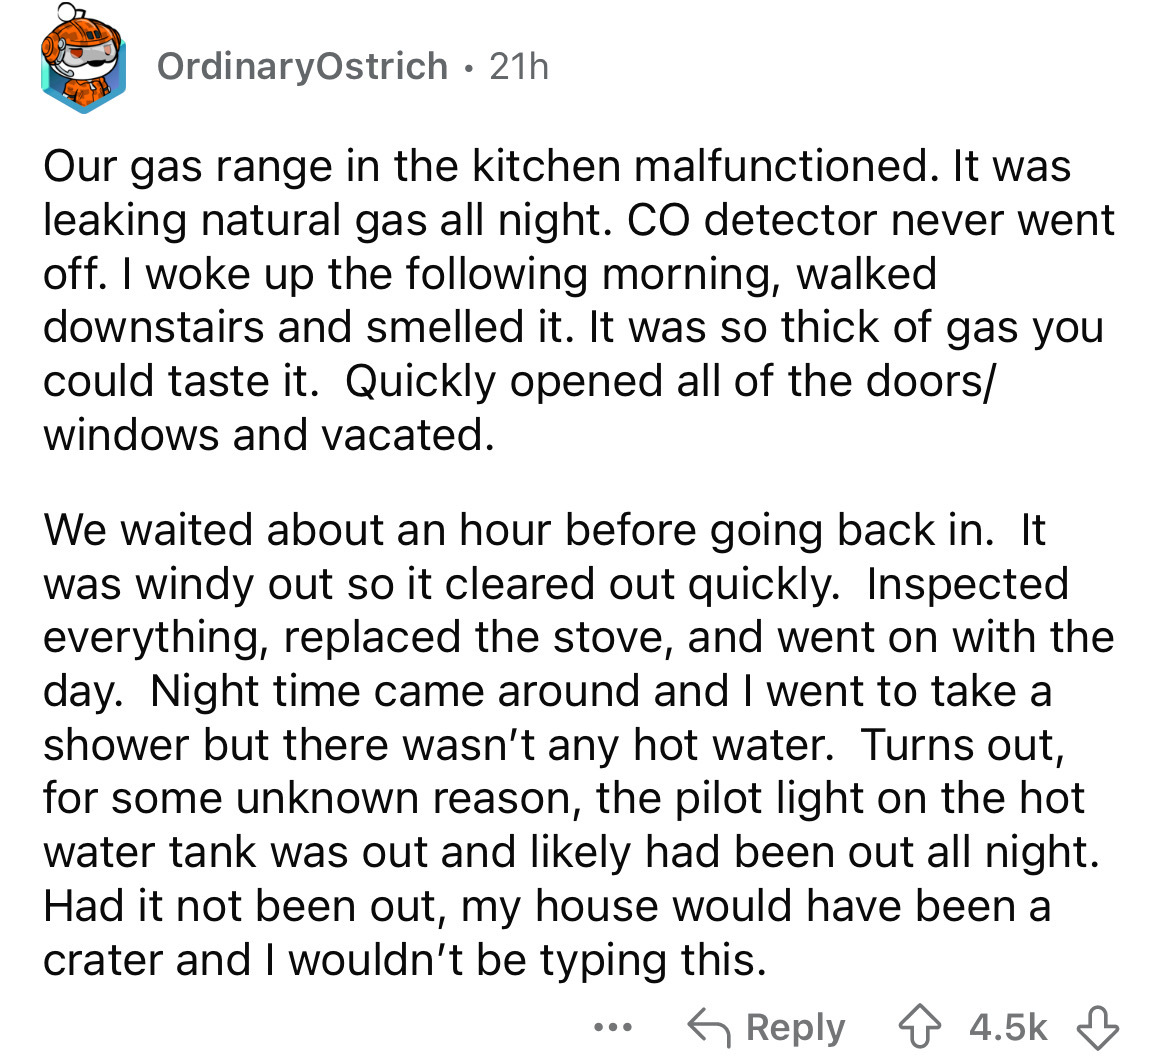 number - OrdinaryOstrich 21h Our gas range in the kitchen malfunctioned. It was leaking natural gas all night. Co detector never went off. I woke up the ing morning, walked downstairs and smelled it. It was so thick of gas you could taste it. Quickly open